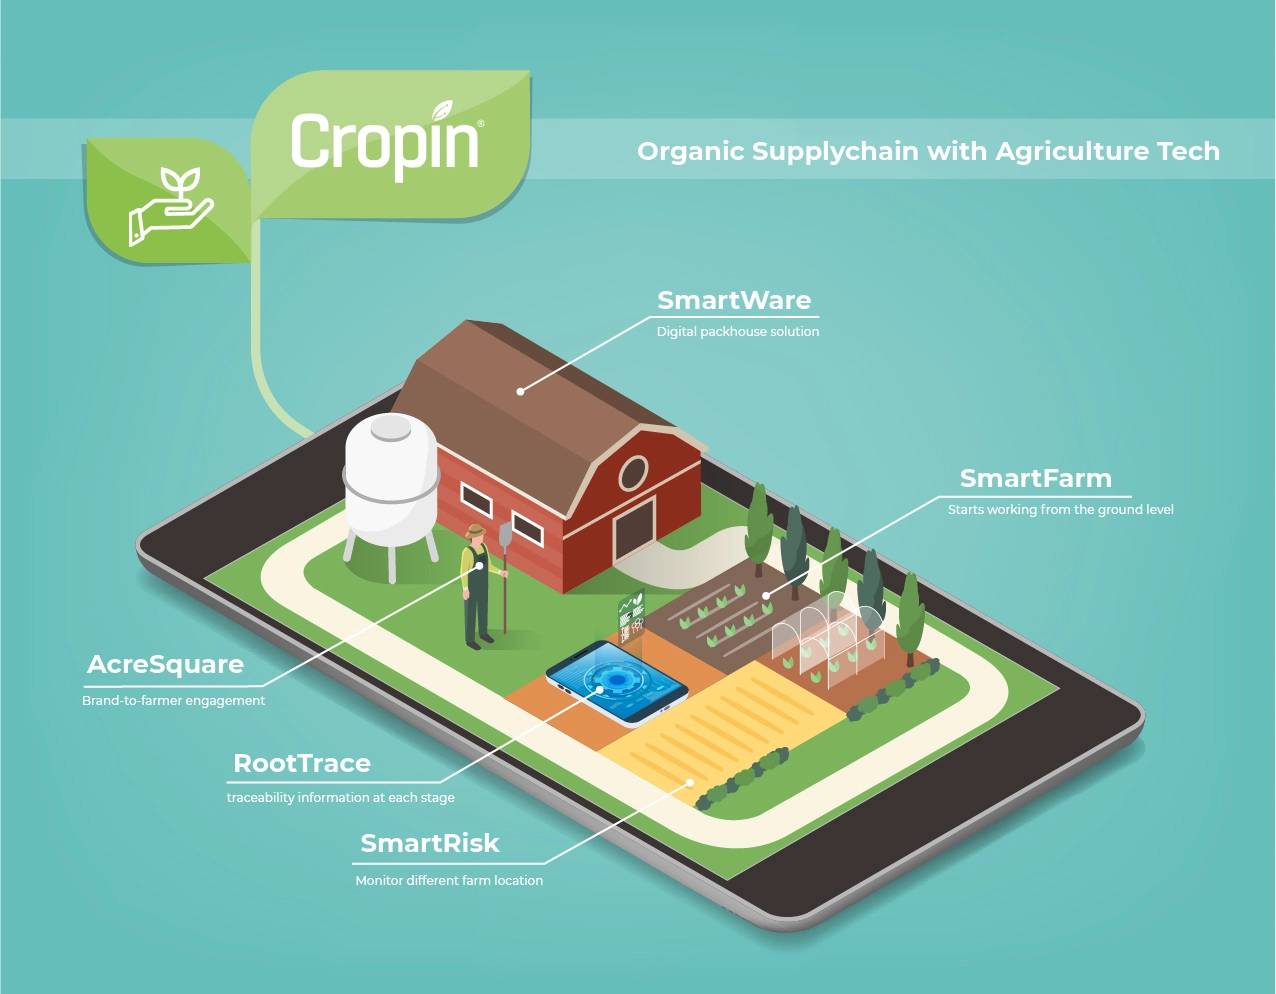 Organic Supplychain with Agriculture Tech